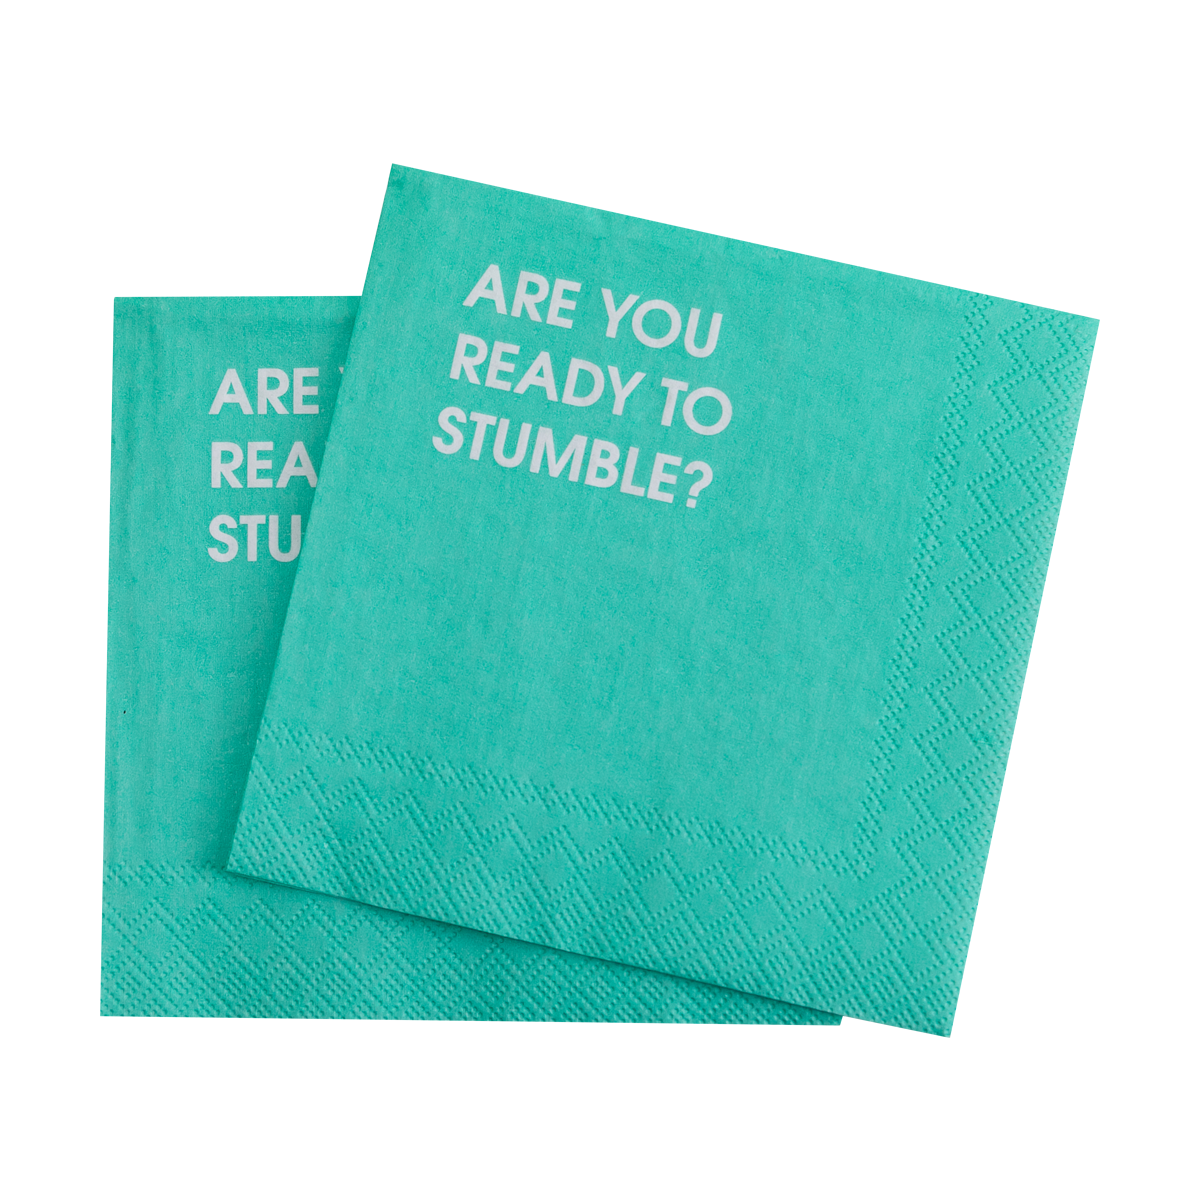 Are You Ready To Stumble? - Cocktail Napkins